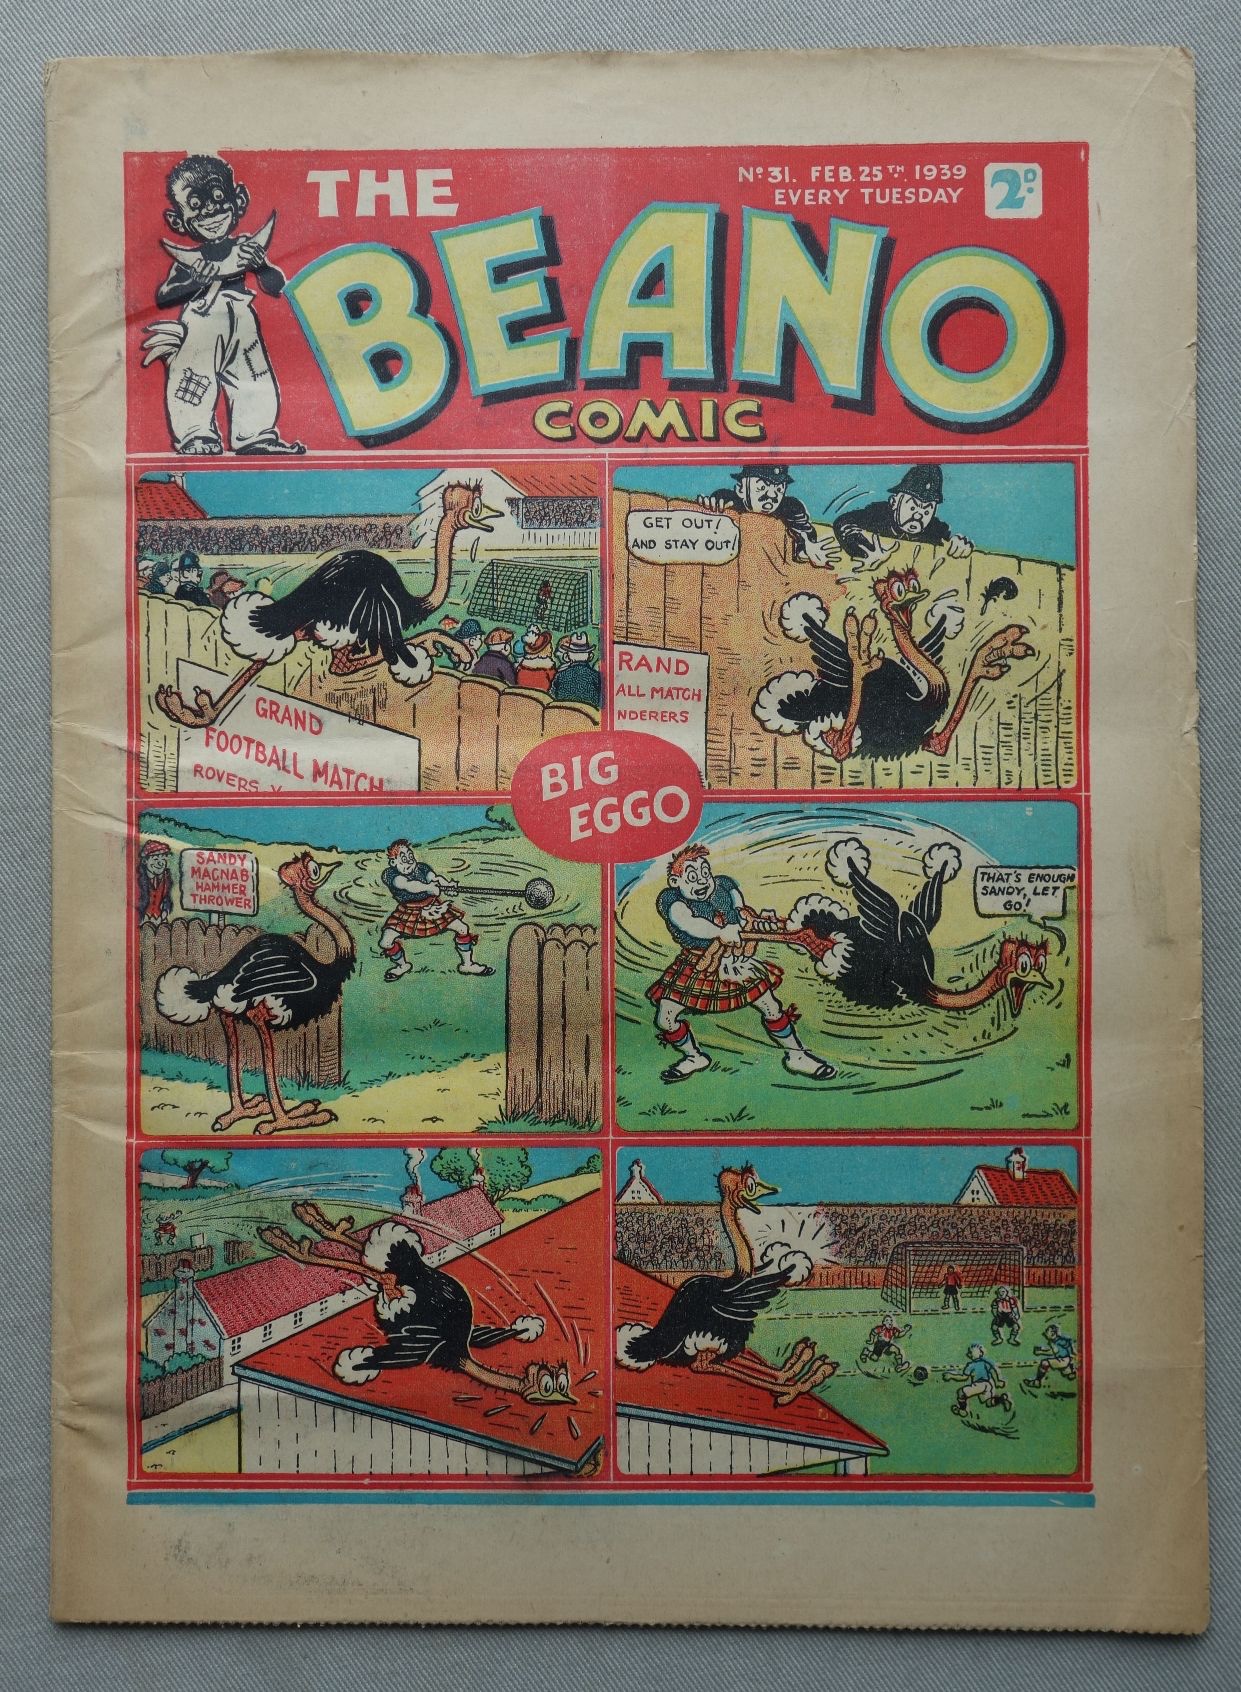 Beano No. 31, cover dated 25th February 1939